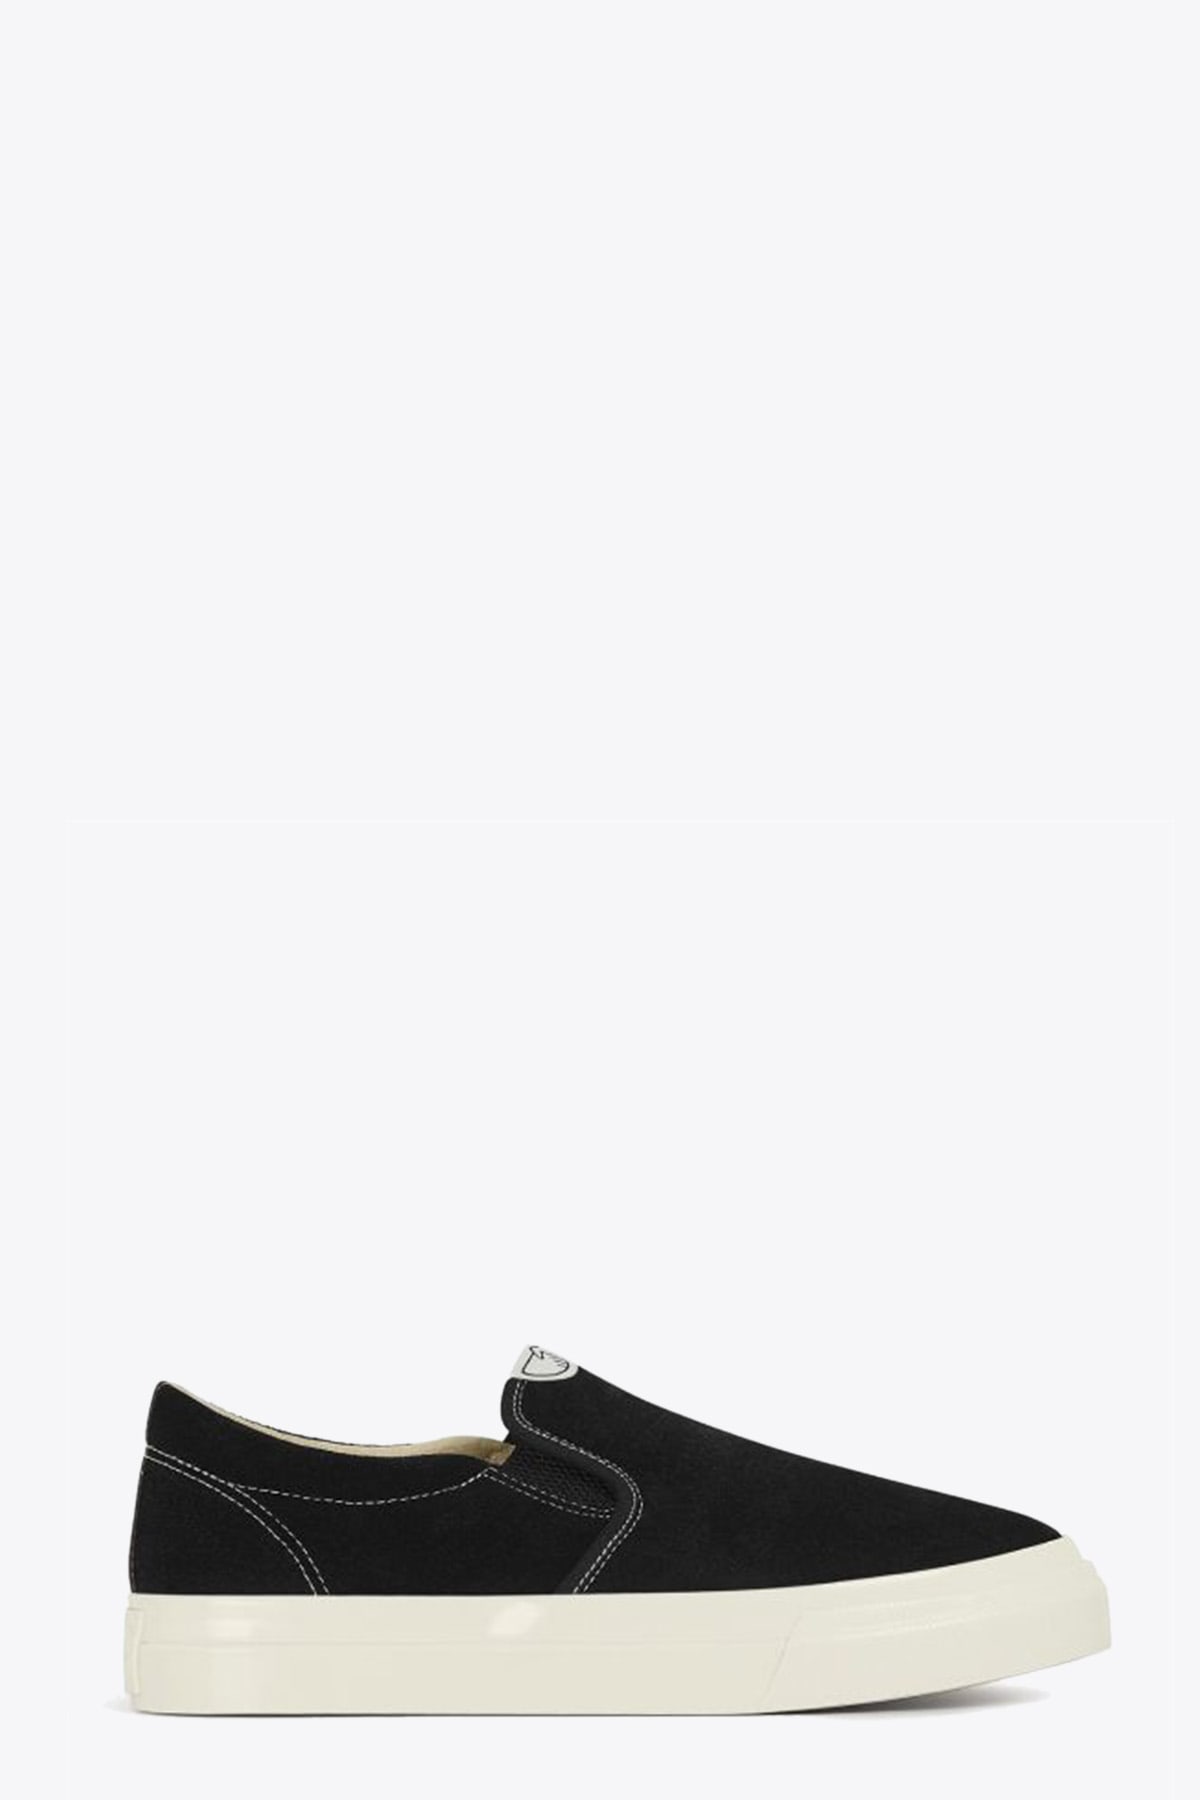 S.W.C Stepney Workers Club Lister M Suede Black suede slip-on sneaker - Lister M suede